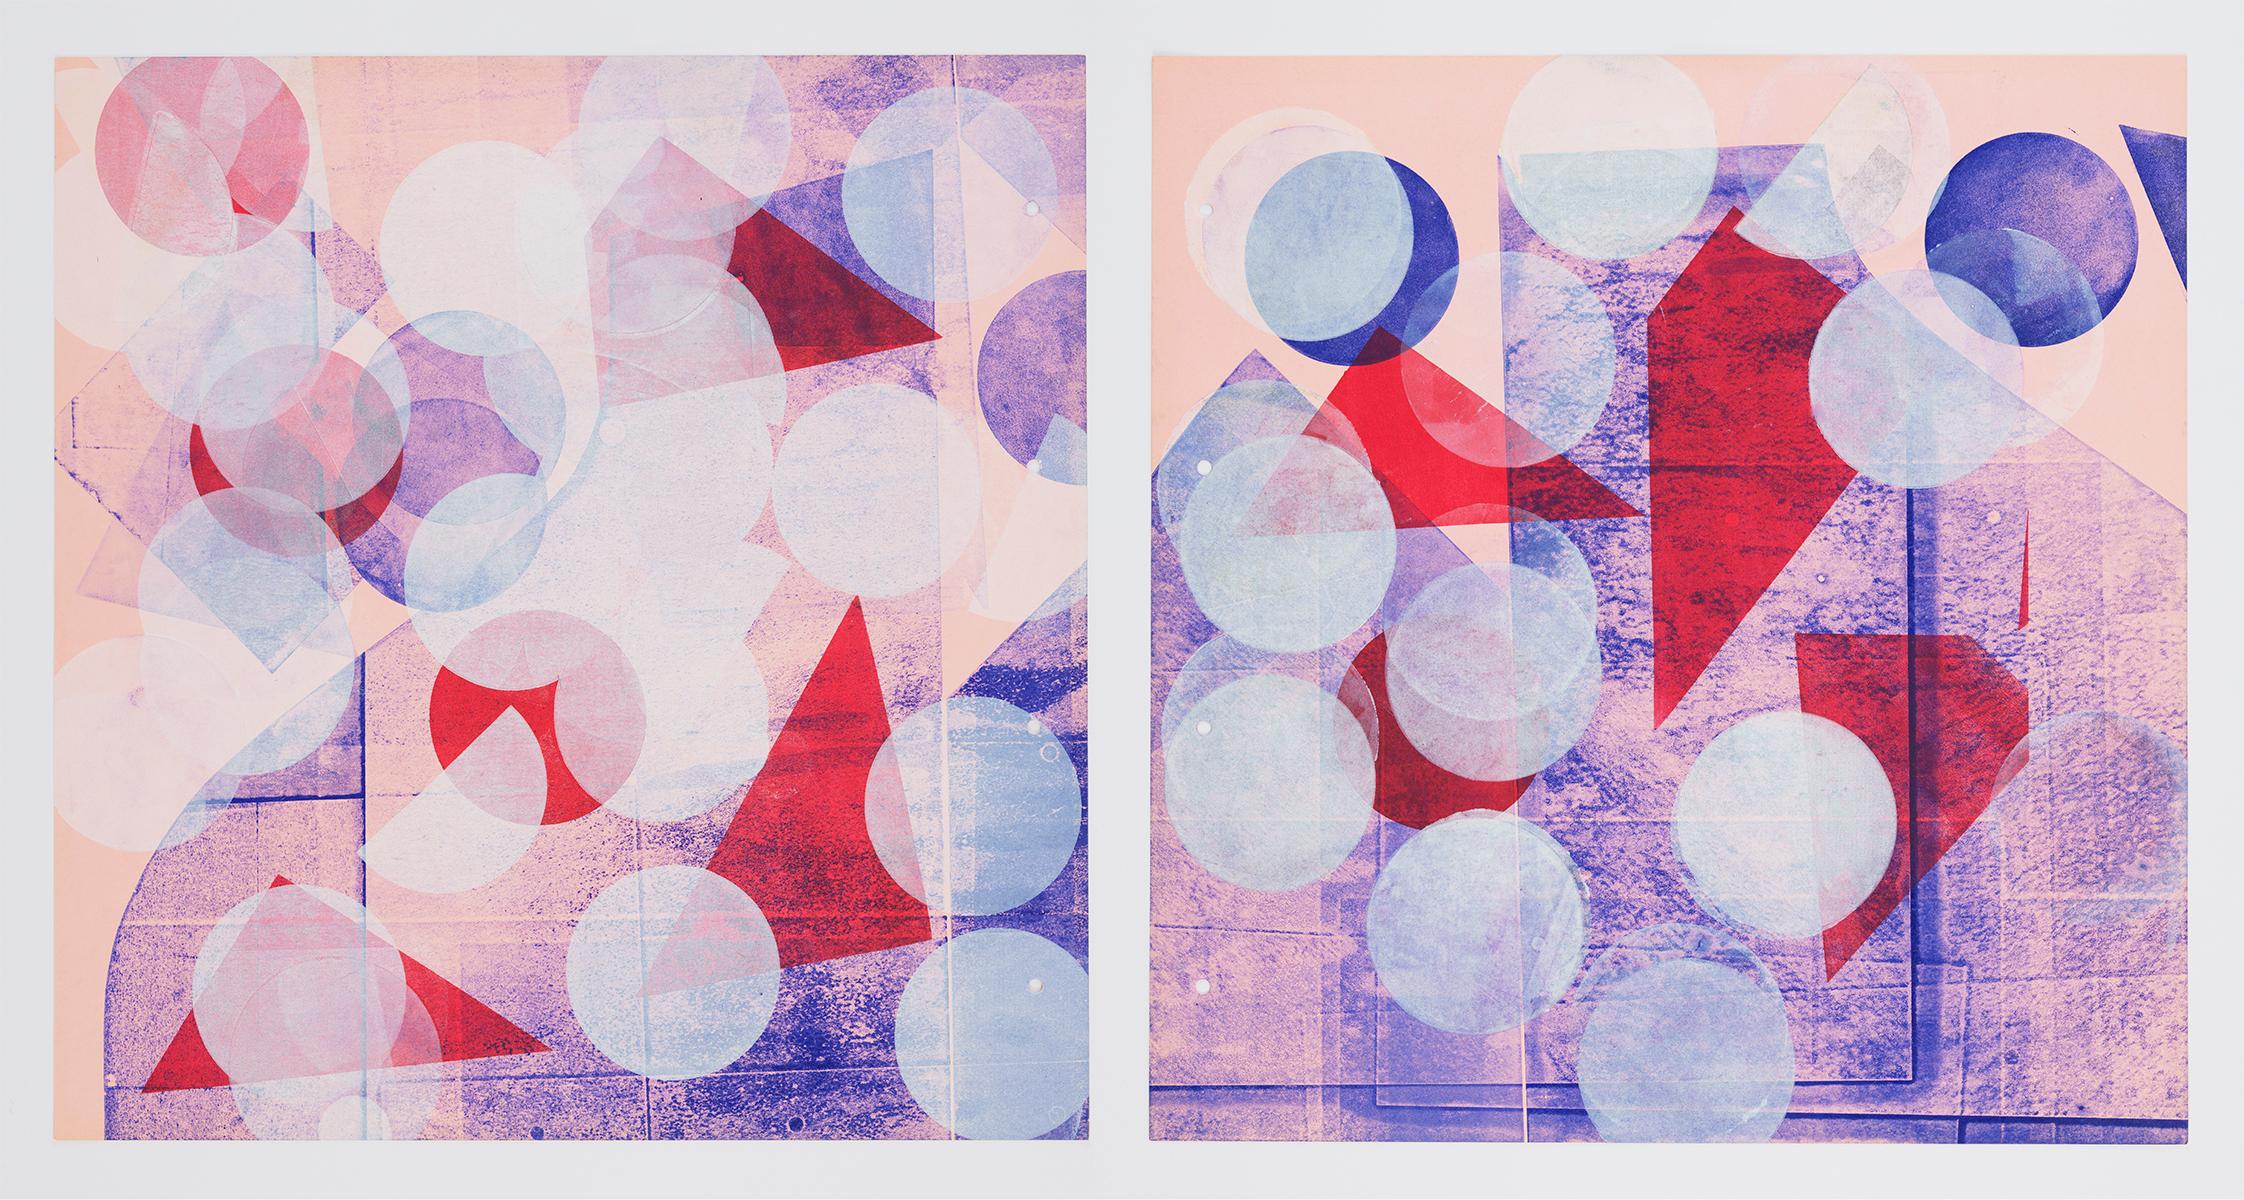 Pink with White Circles (Left Panel) - Gray Abstract Print by Austin Thomas